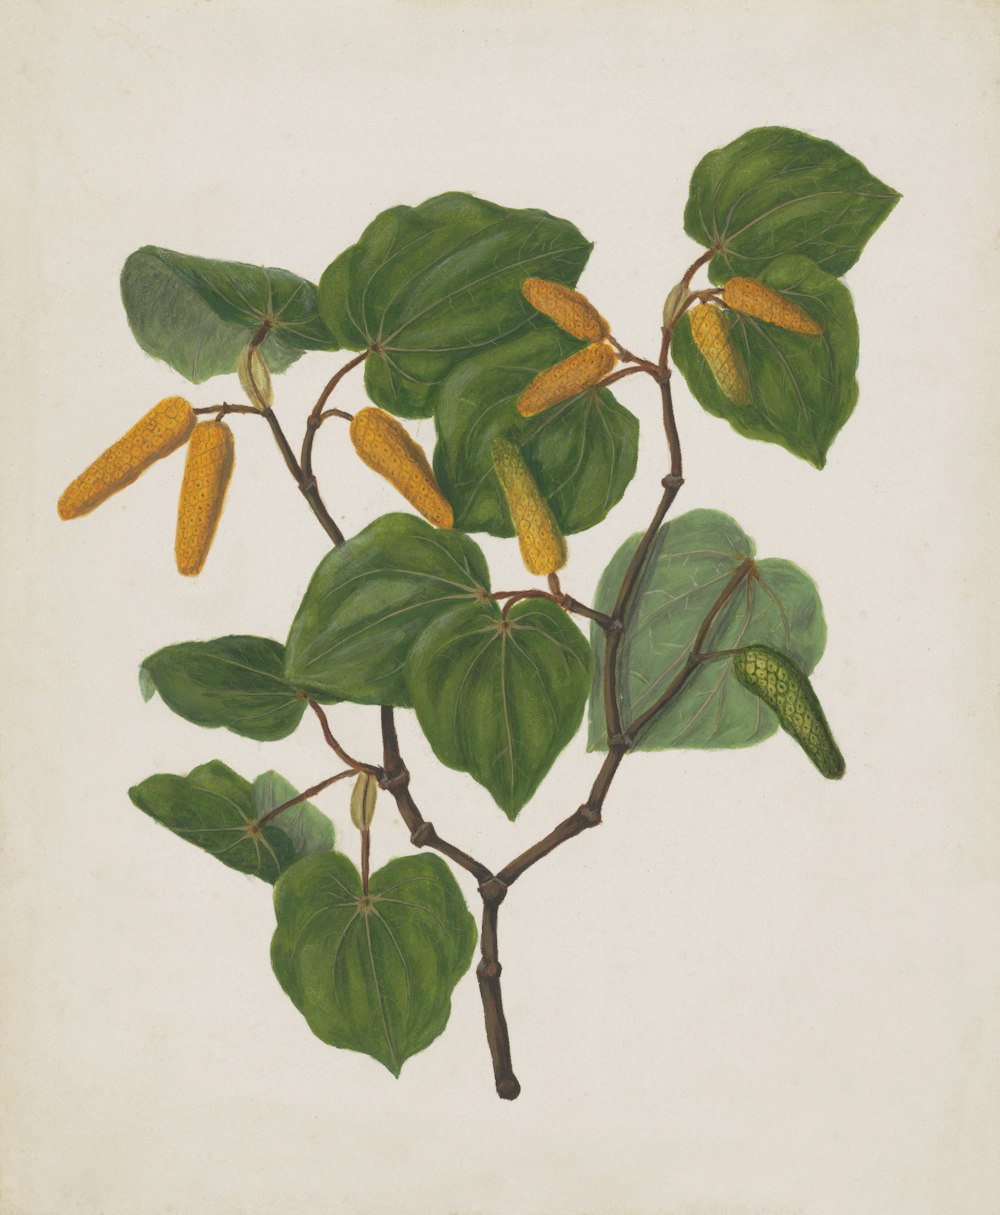 a drawing of a plant with yellow flowers